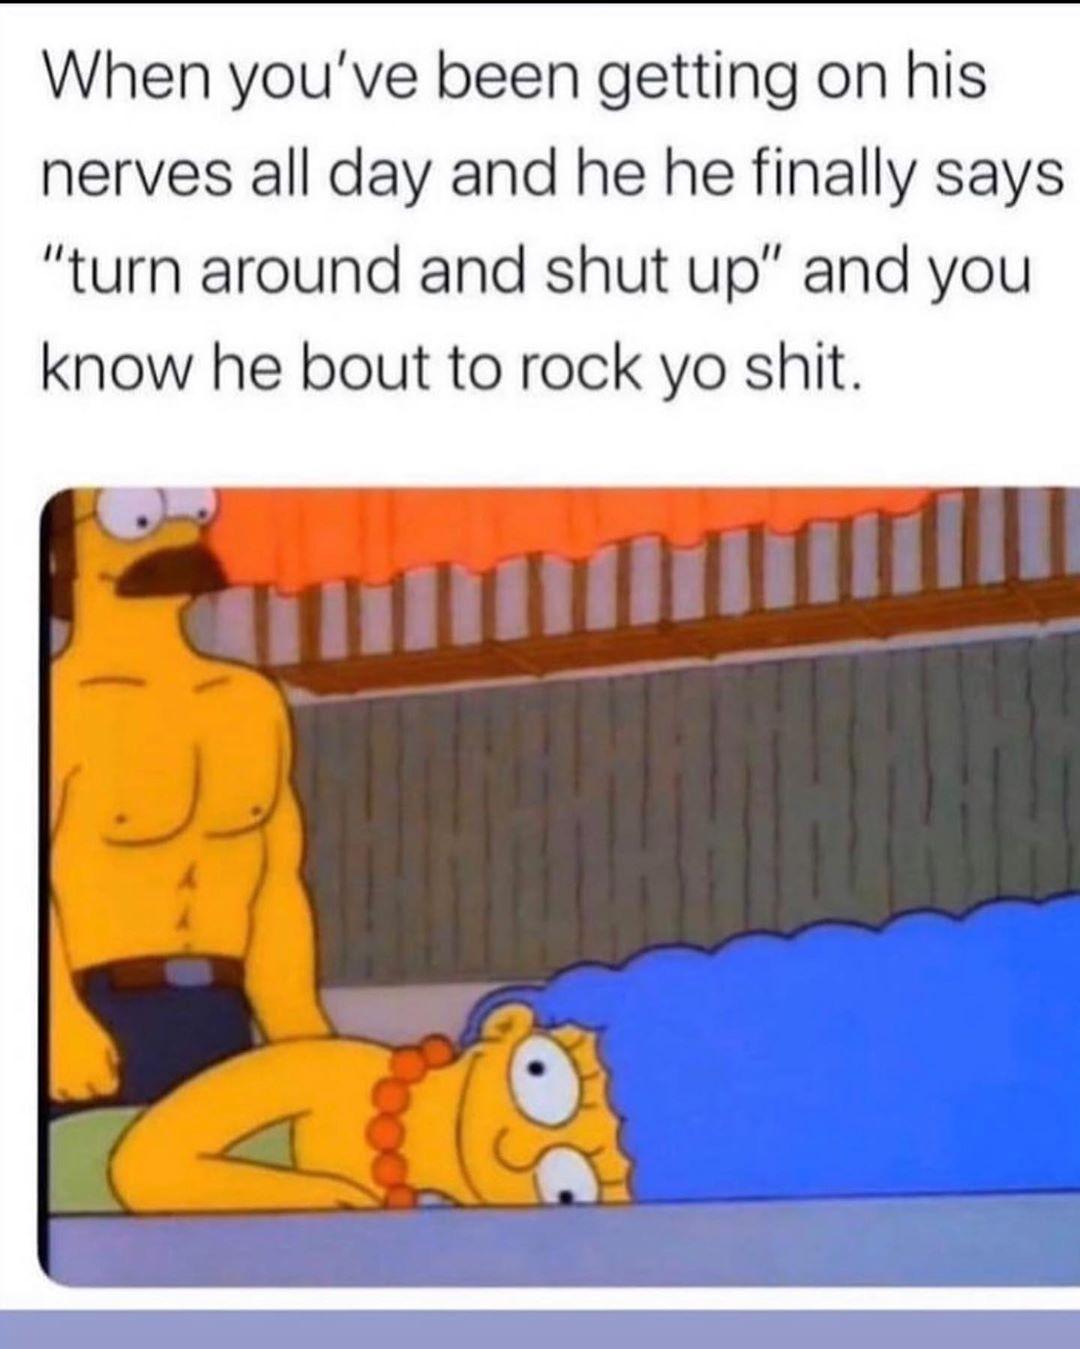 cartoon - When you've been getting on his nerves all day and he he finally says "turn around and shut up" and you know he bout to rock yo shit.